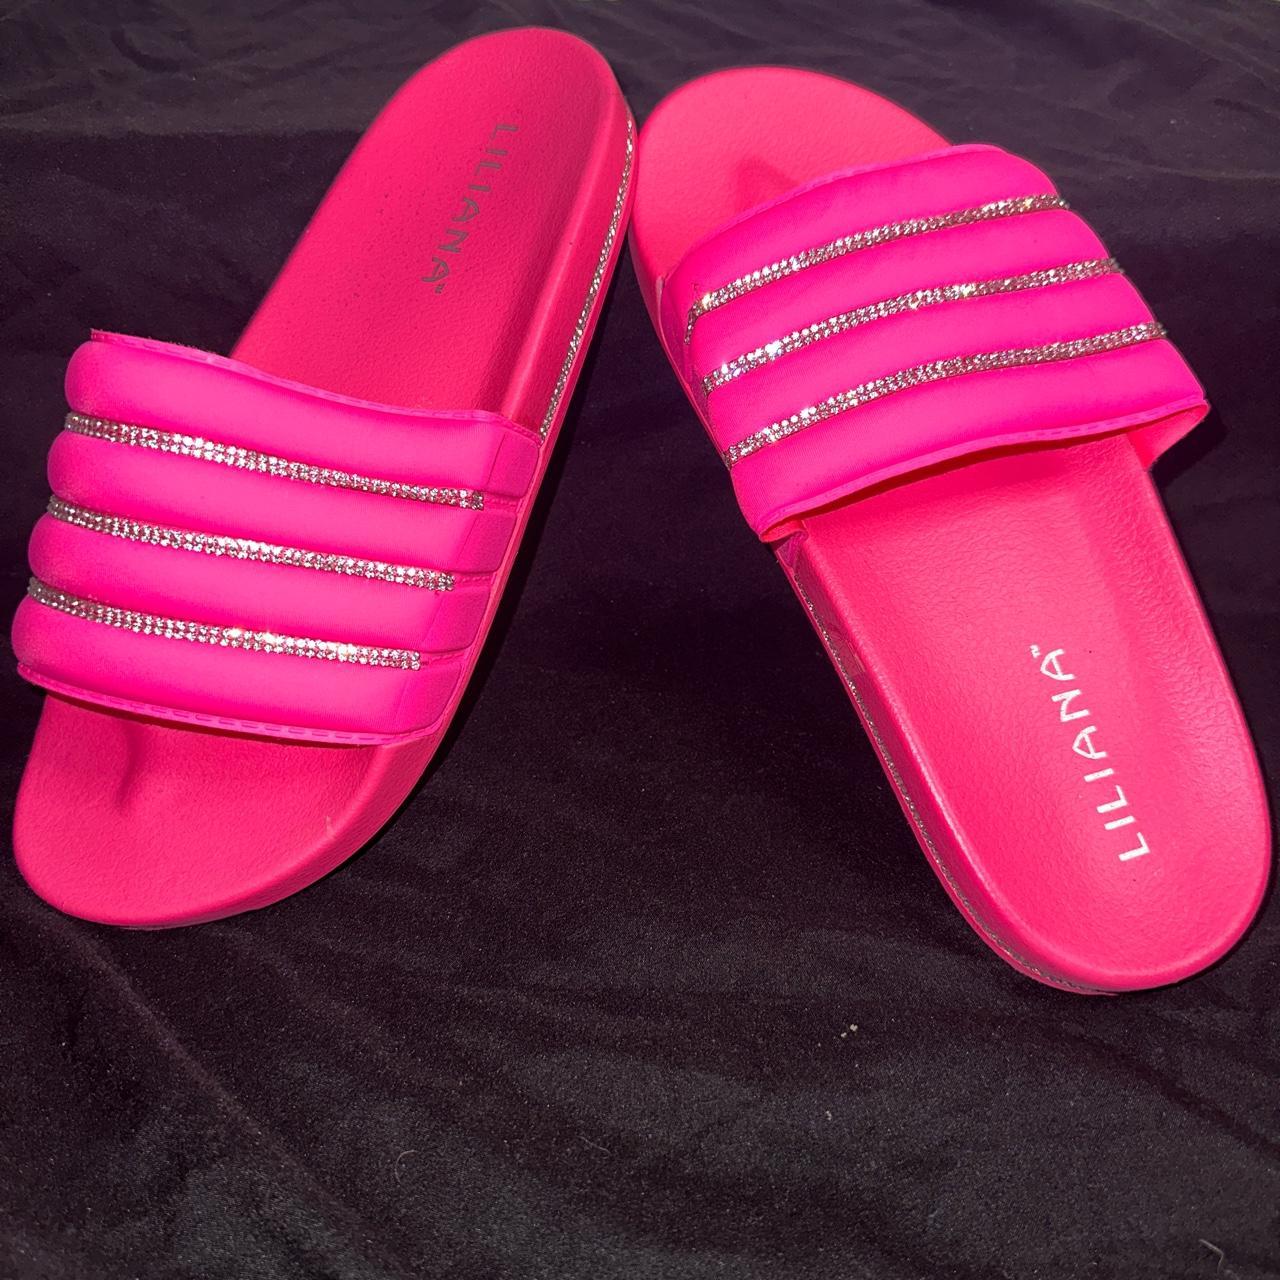 Lillian Rose Women's Pink and Silver Slides